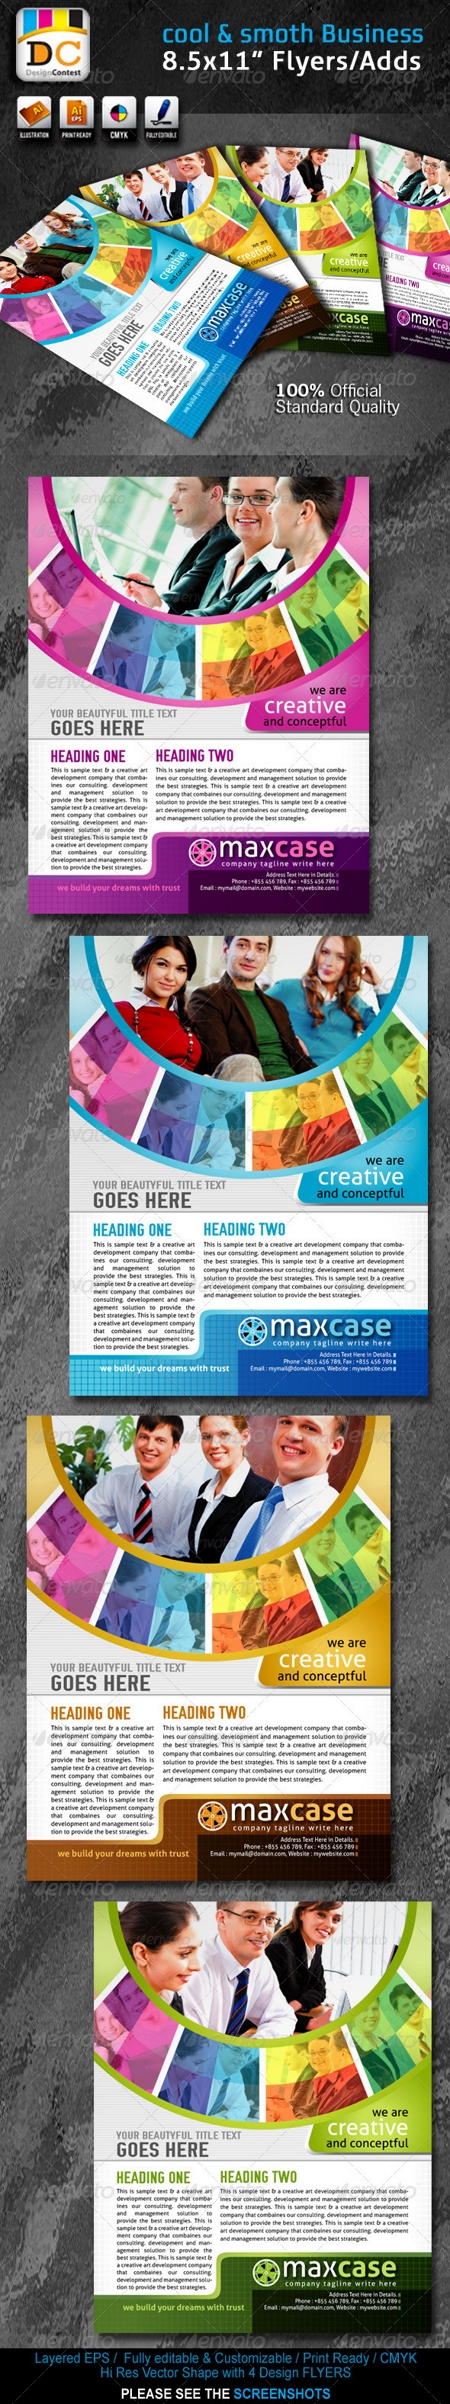 GraphicRiver: Cool & Smooth Corporate Business Flyers/Adds